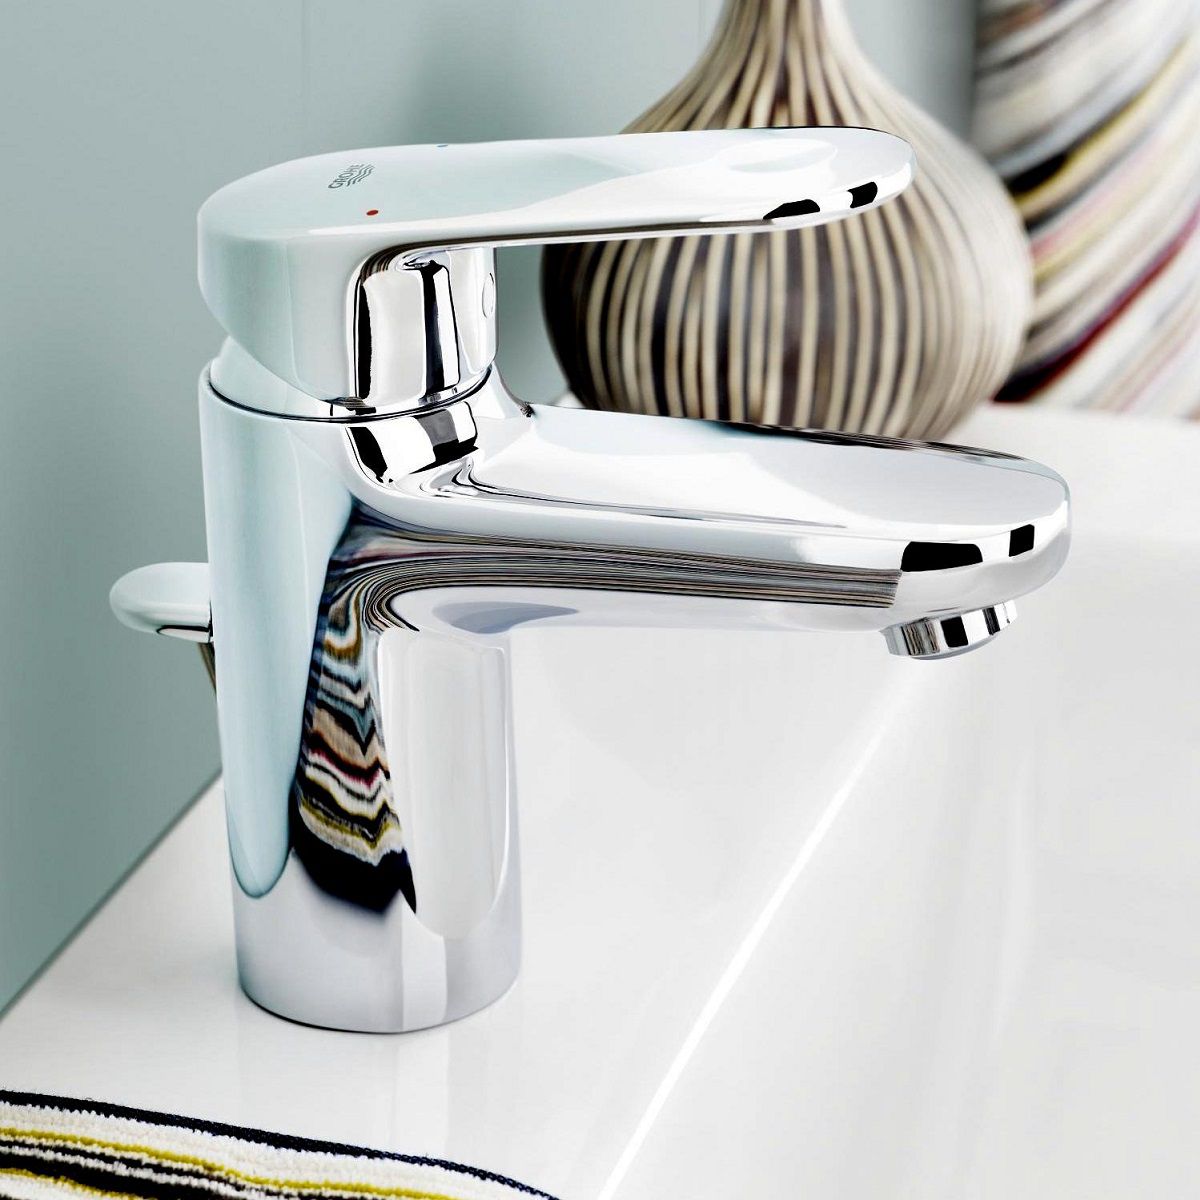 Grohe Europlus Basin Mixer Tap Small Size 159mm Uk Bathrooms